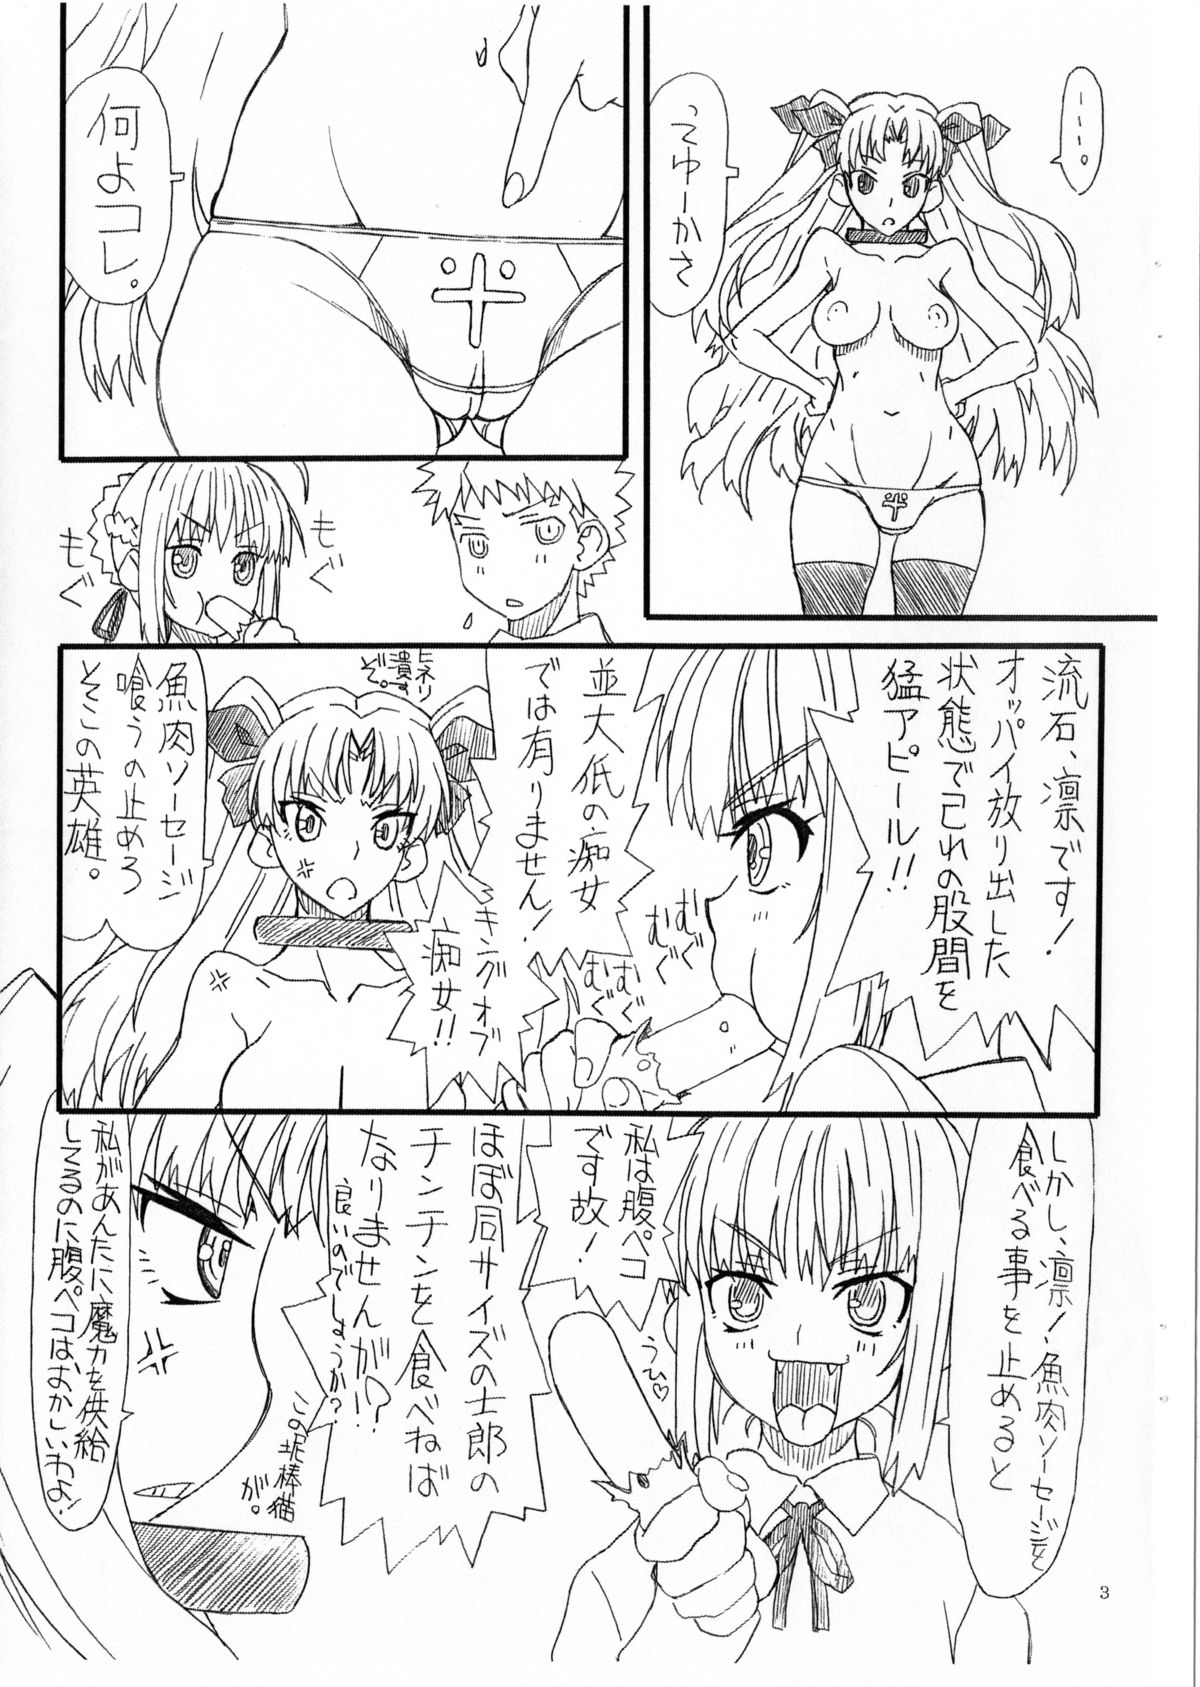 (SC65) [Power Slide (Uttorikun)] Rin to saber 1st Ver0.5 (Fate/stay night) page 4 full